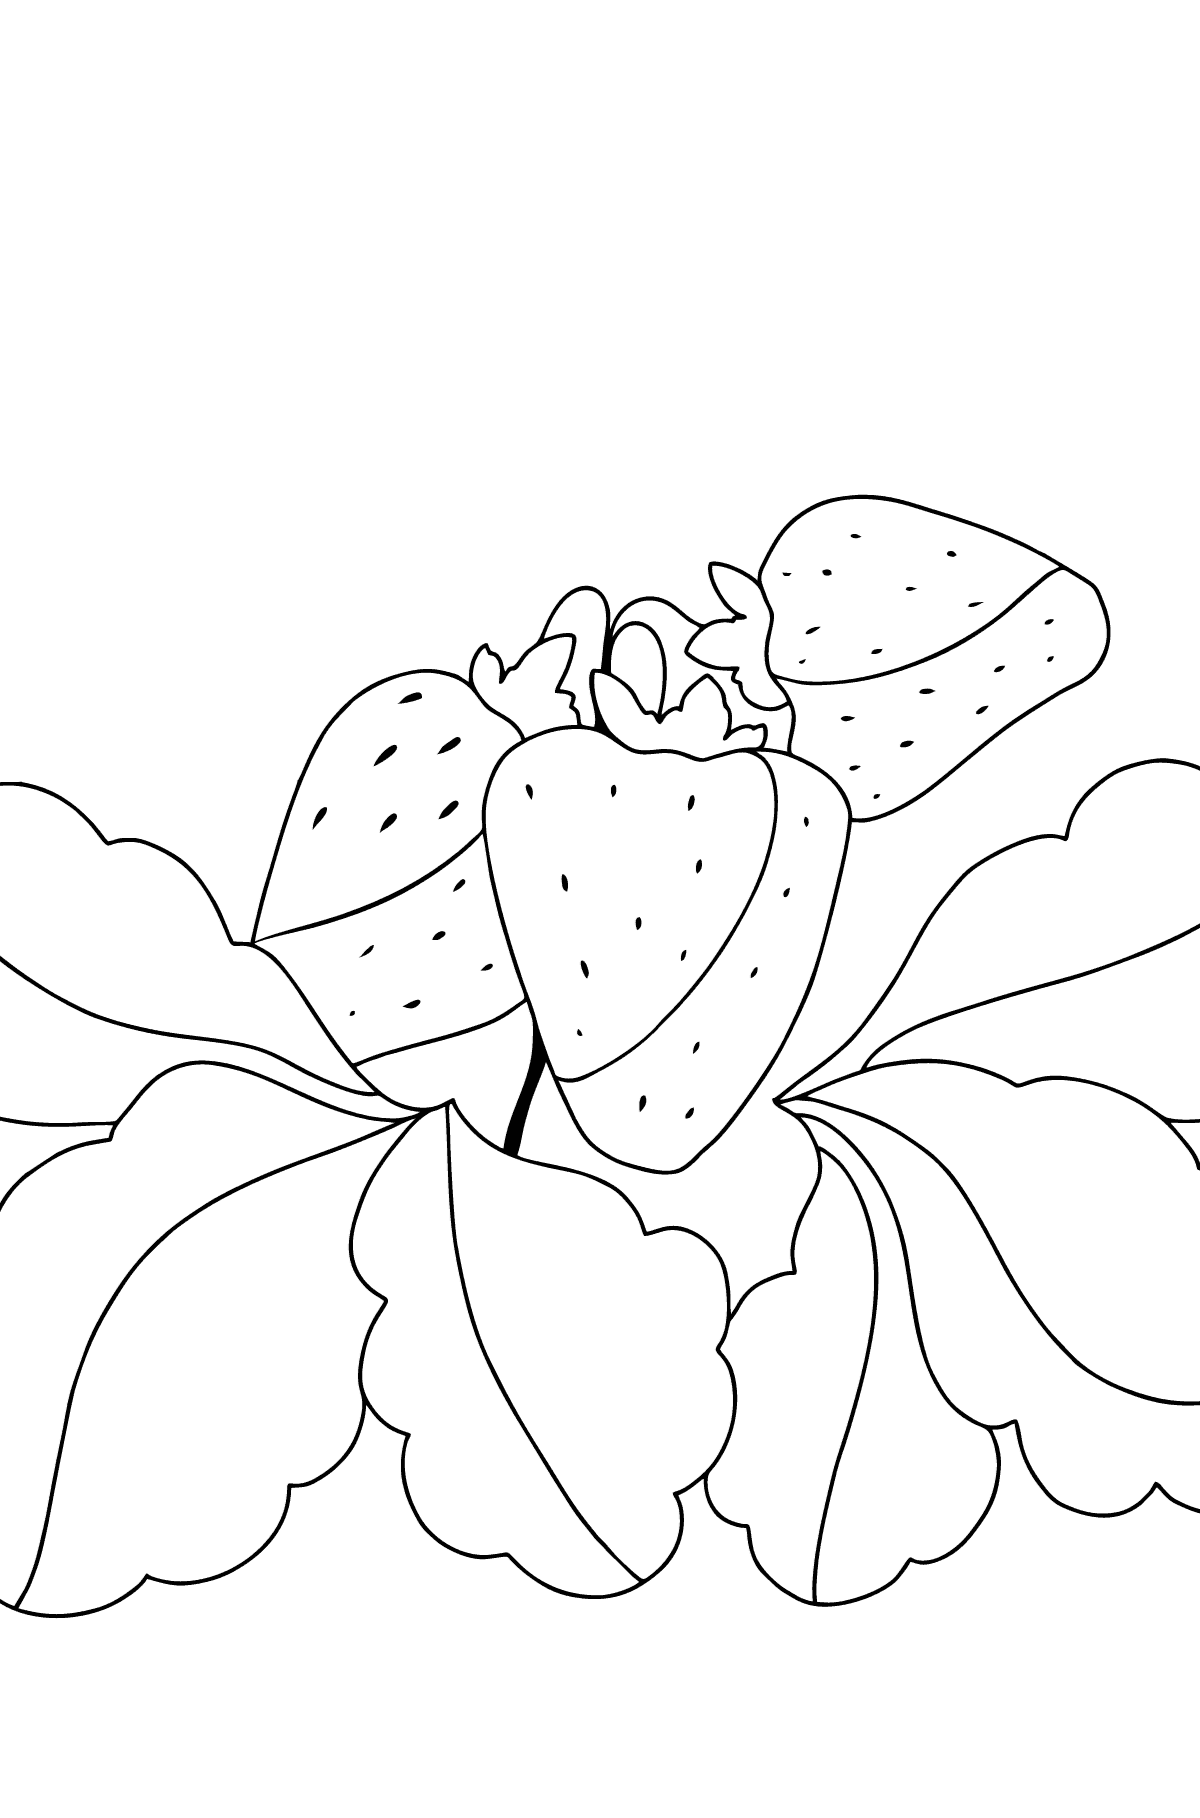 Summer coloring - strawberry - Coloring Pages for Kids